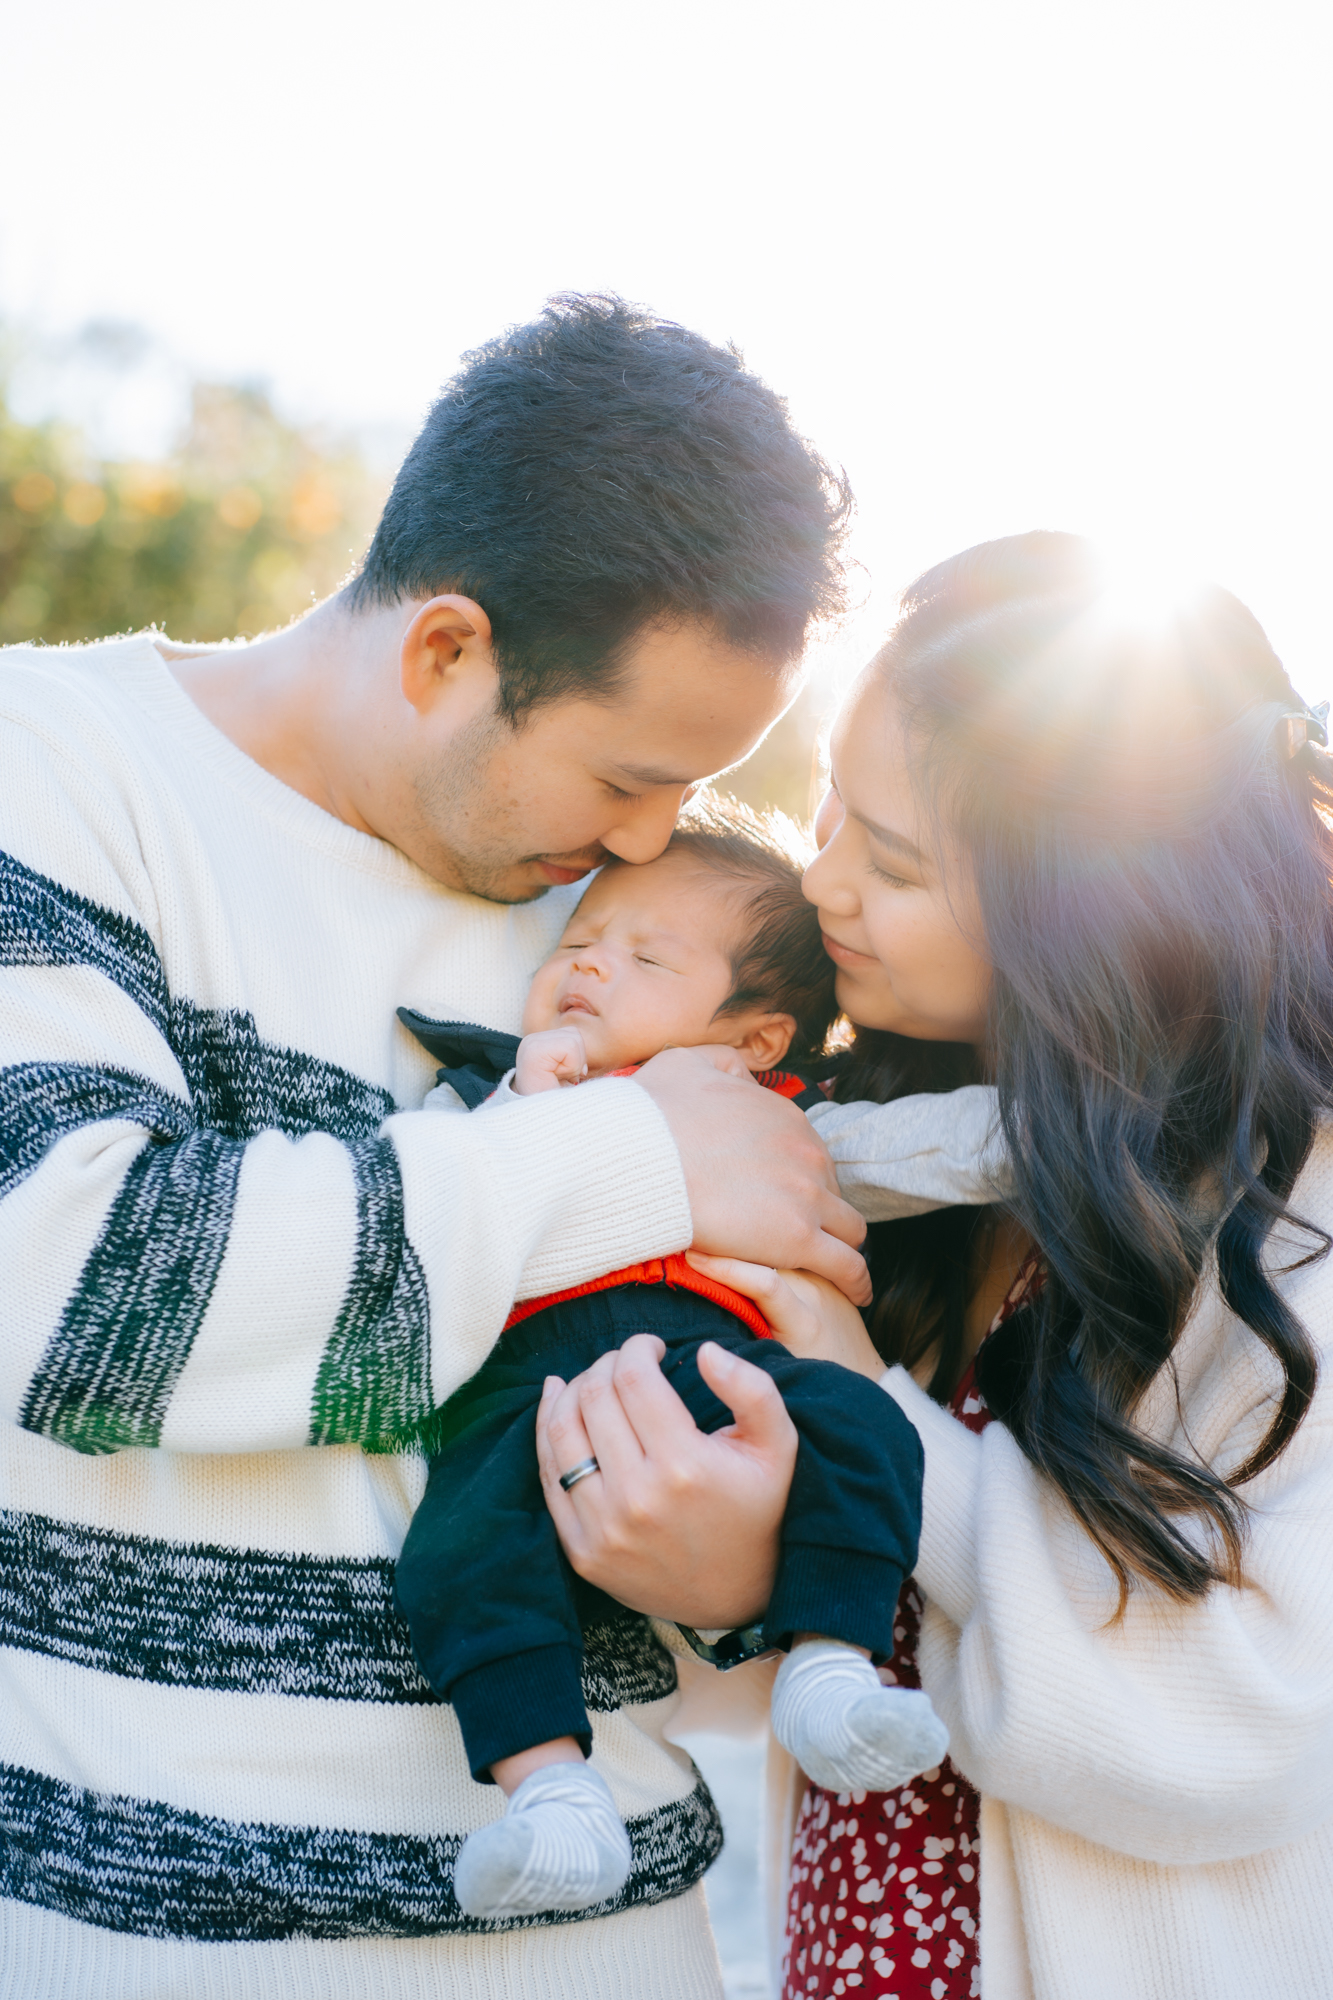 Outdoor family session with newborn in Malaga Cove, Palos Verdes, Los Angeles, California